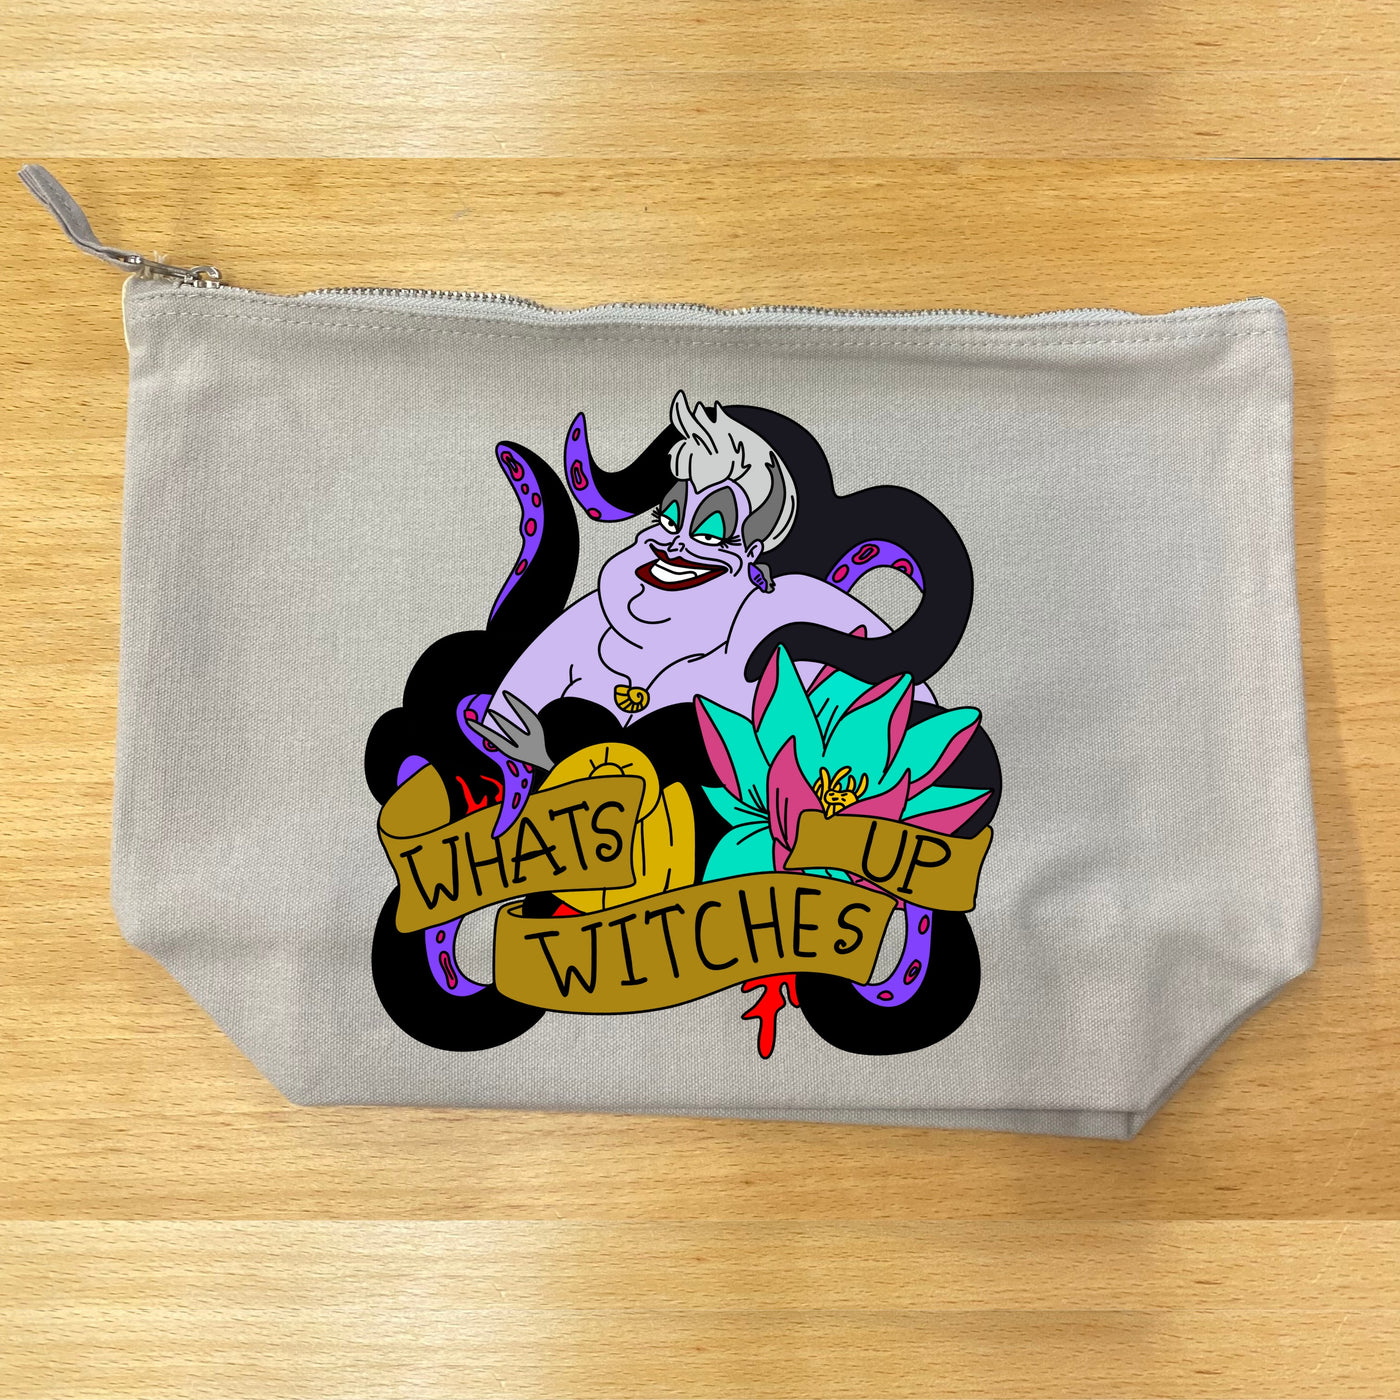 "Whats Up Witches" Accessory Bag